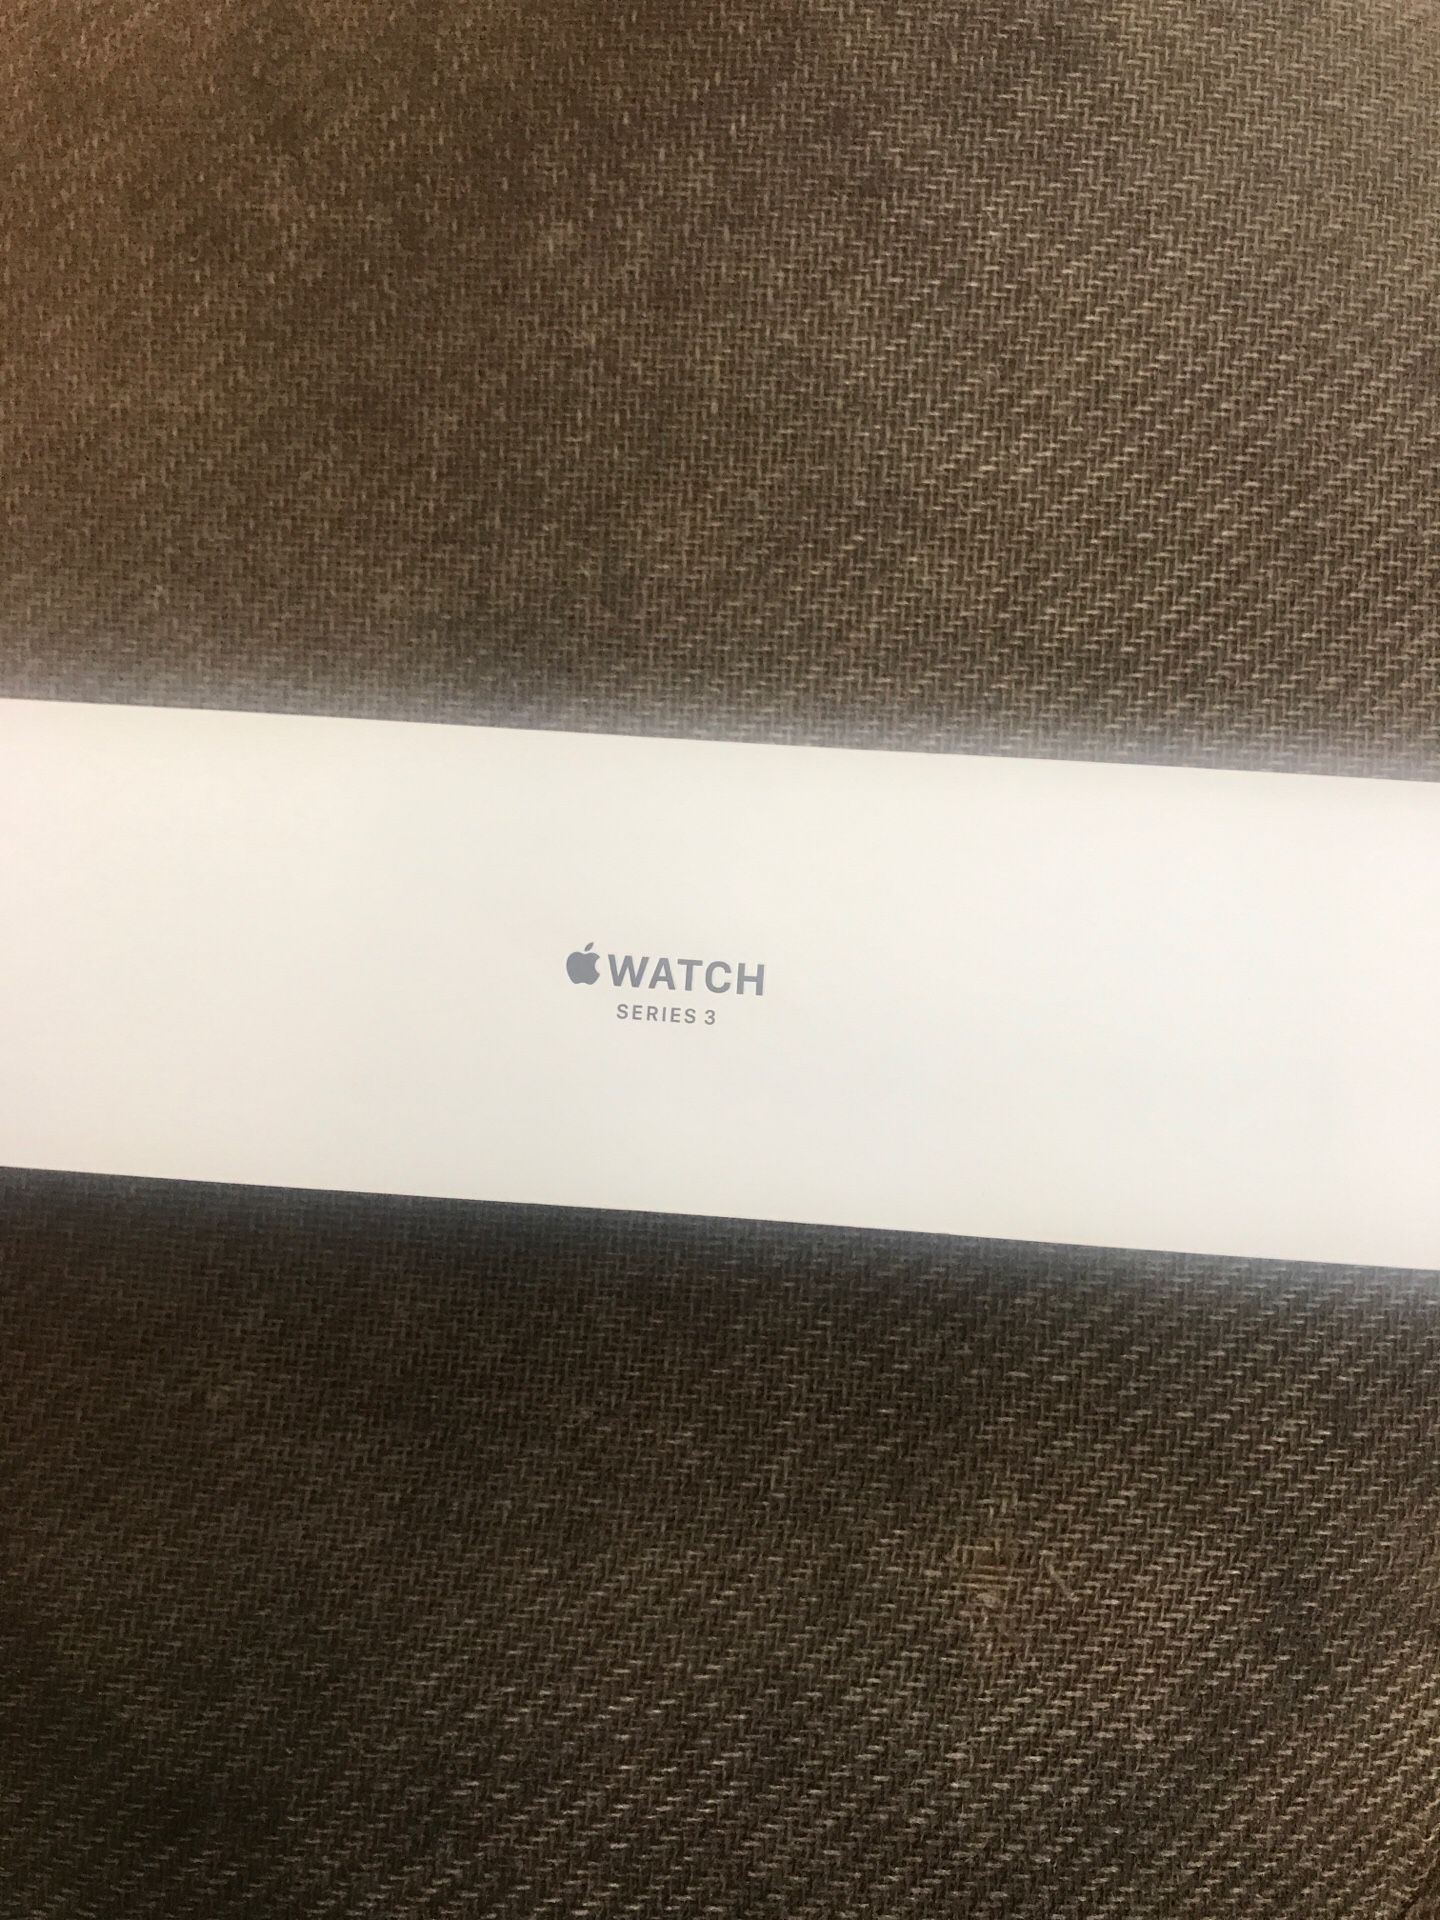 Apple Watch like new condition. Series 3